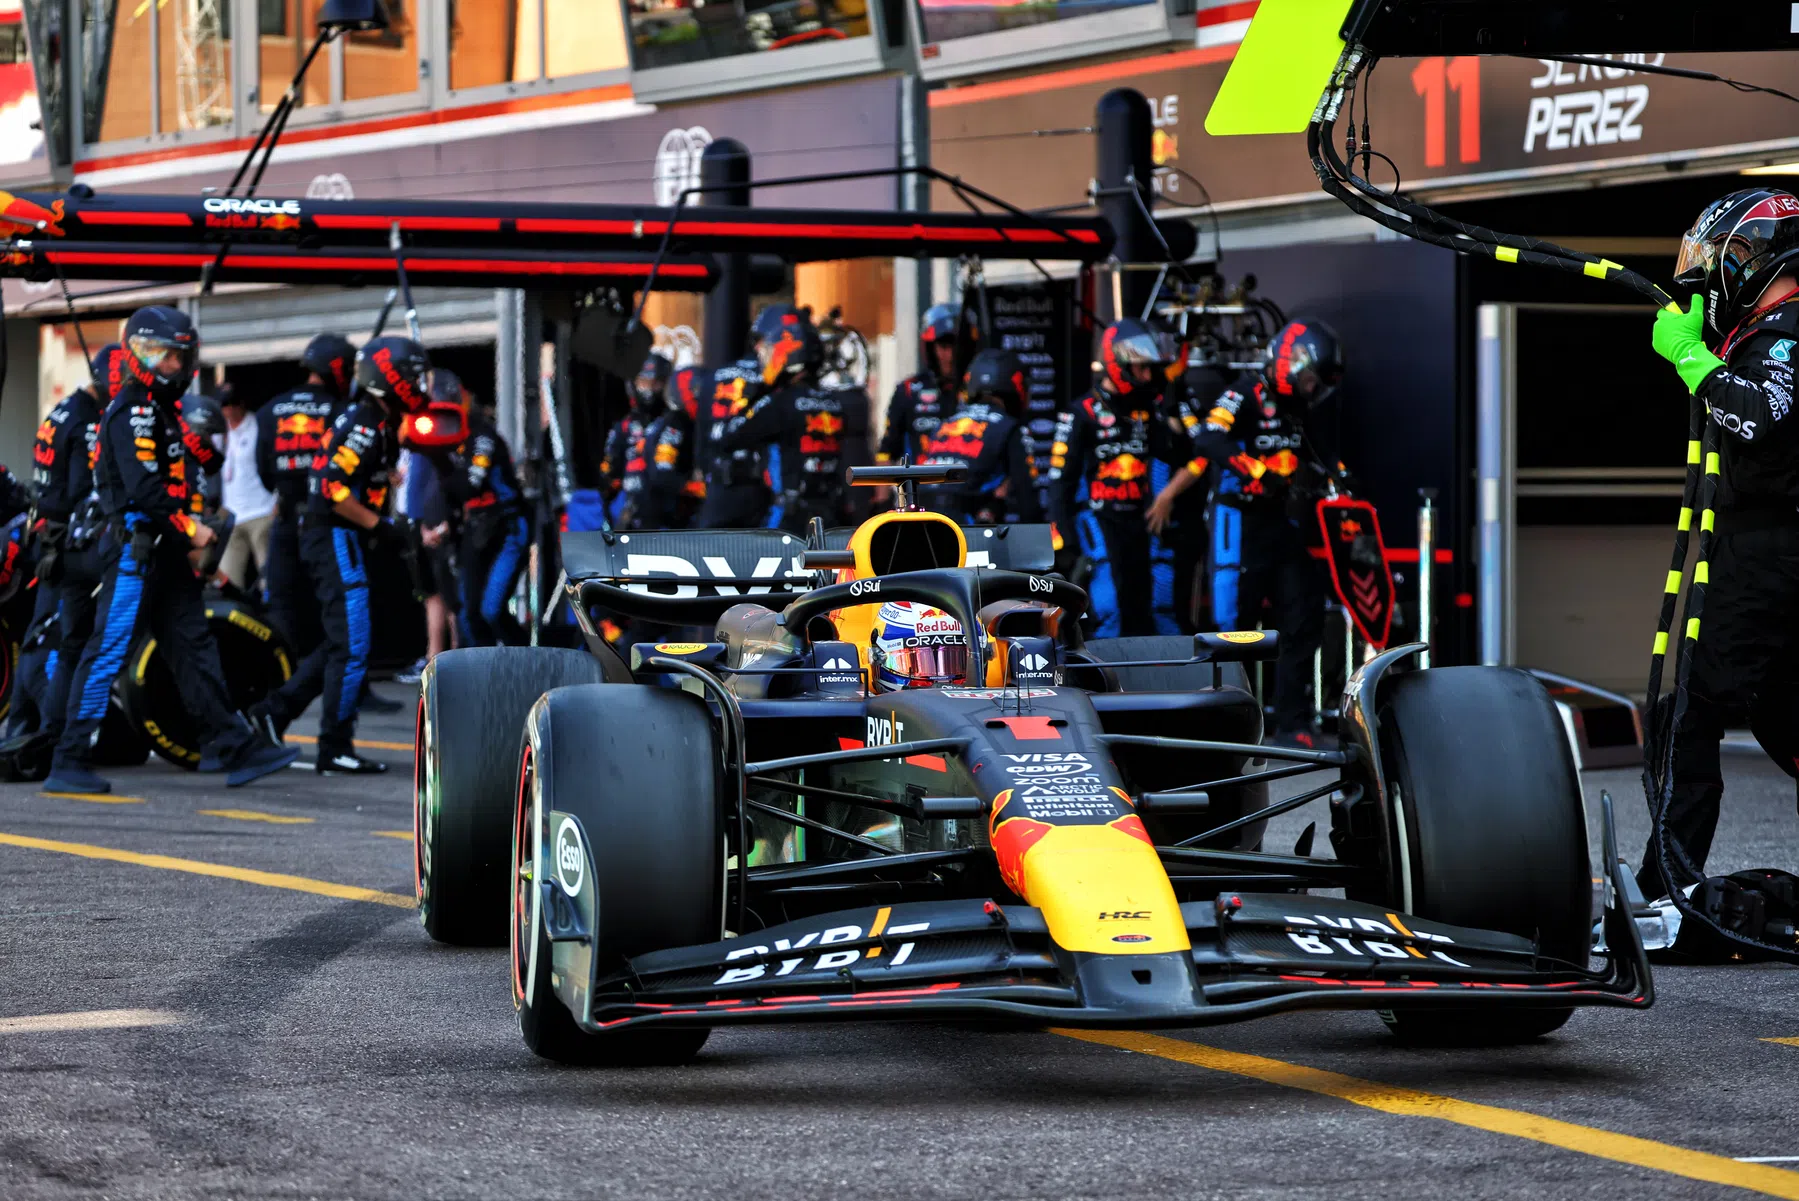 Former F1 strategist Bernie Collins believes this is Red Bull's mistake